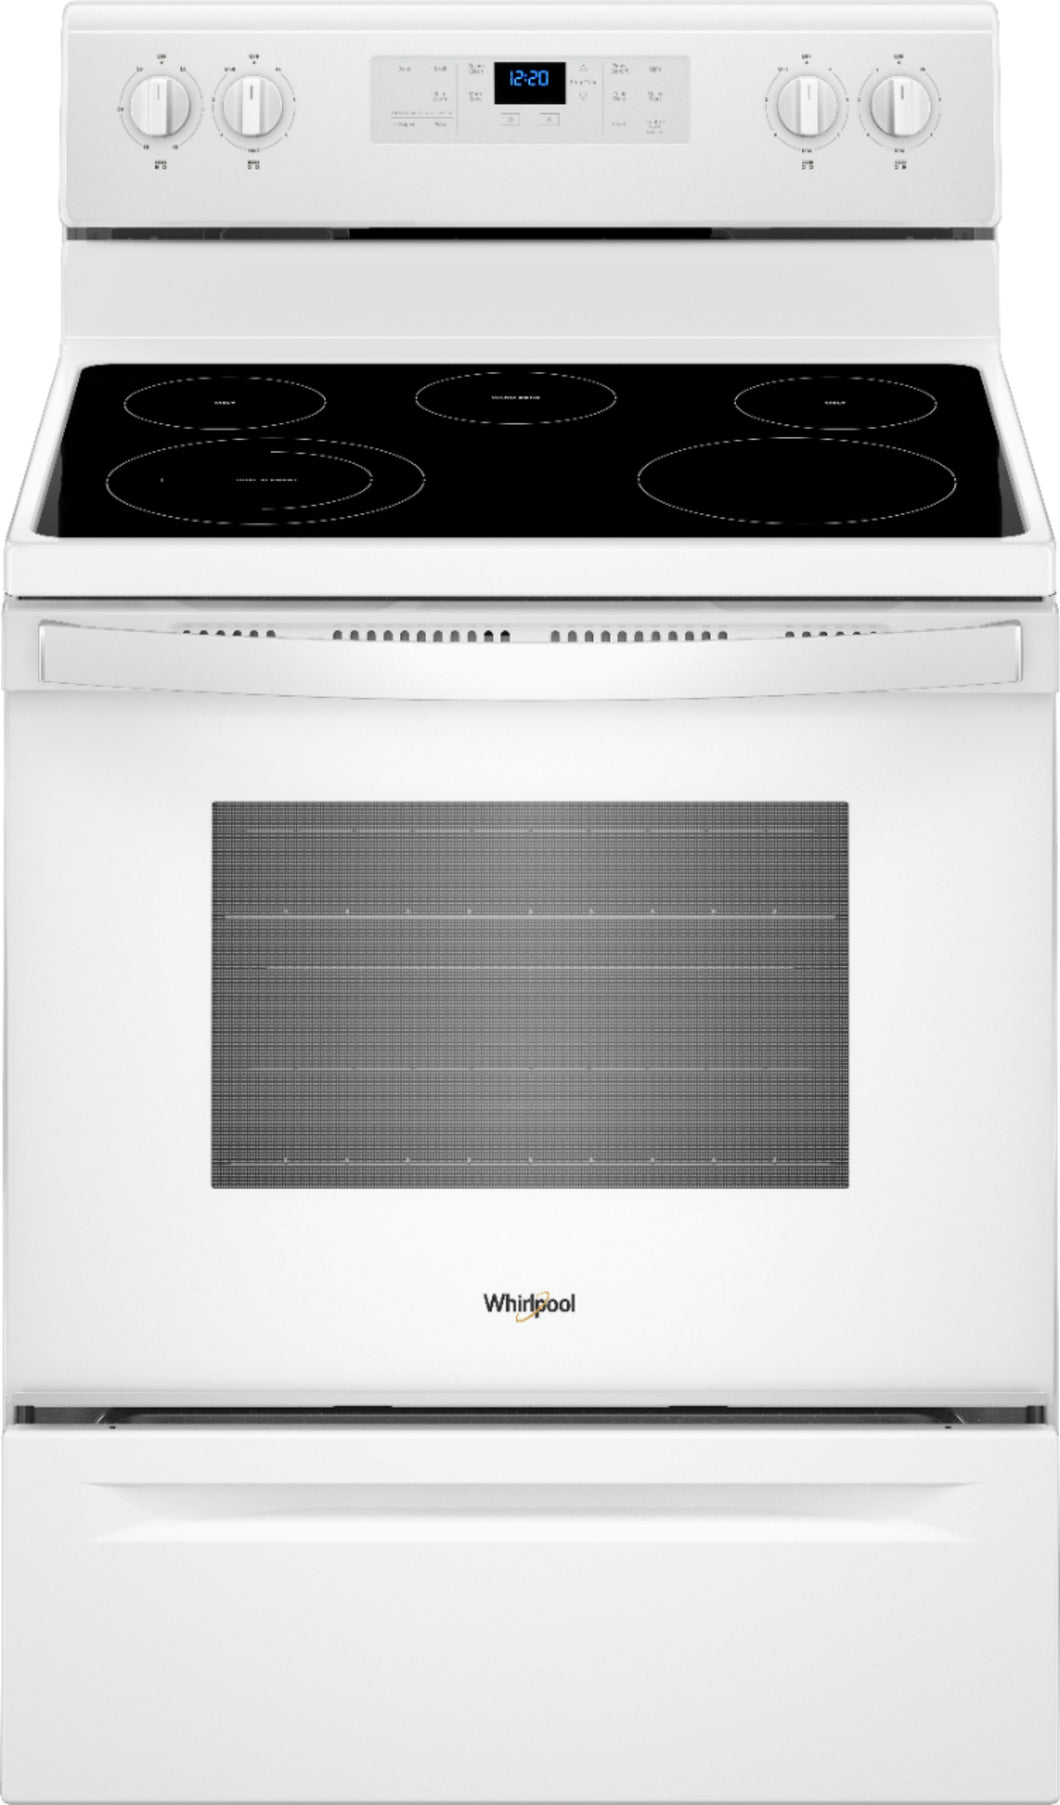 Whirlpool Freestanding Electric Range with 5 Elements